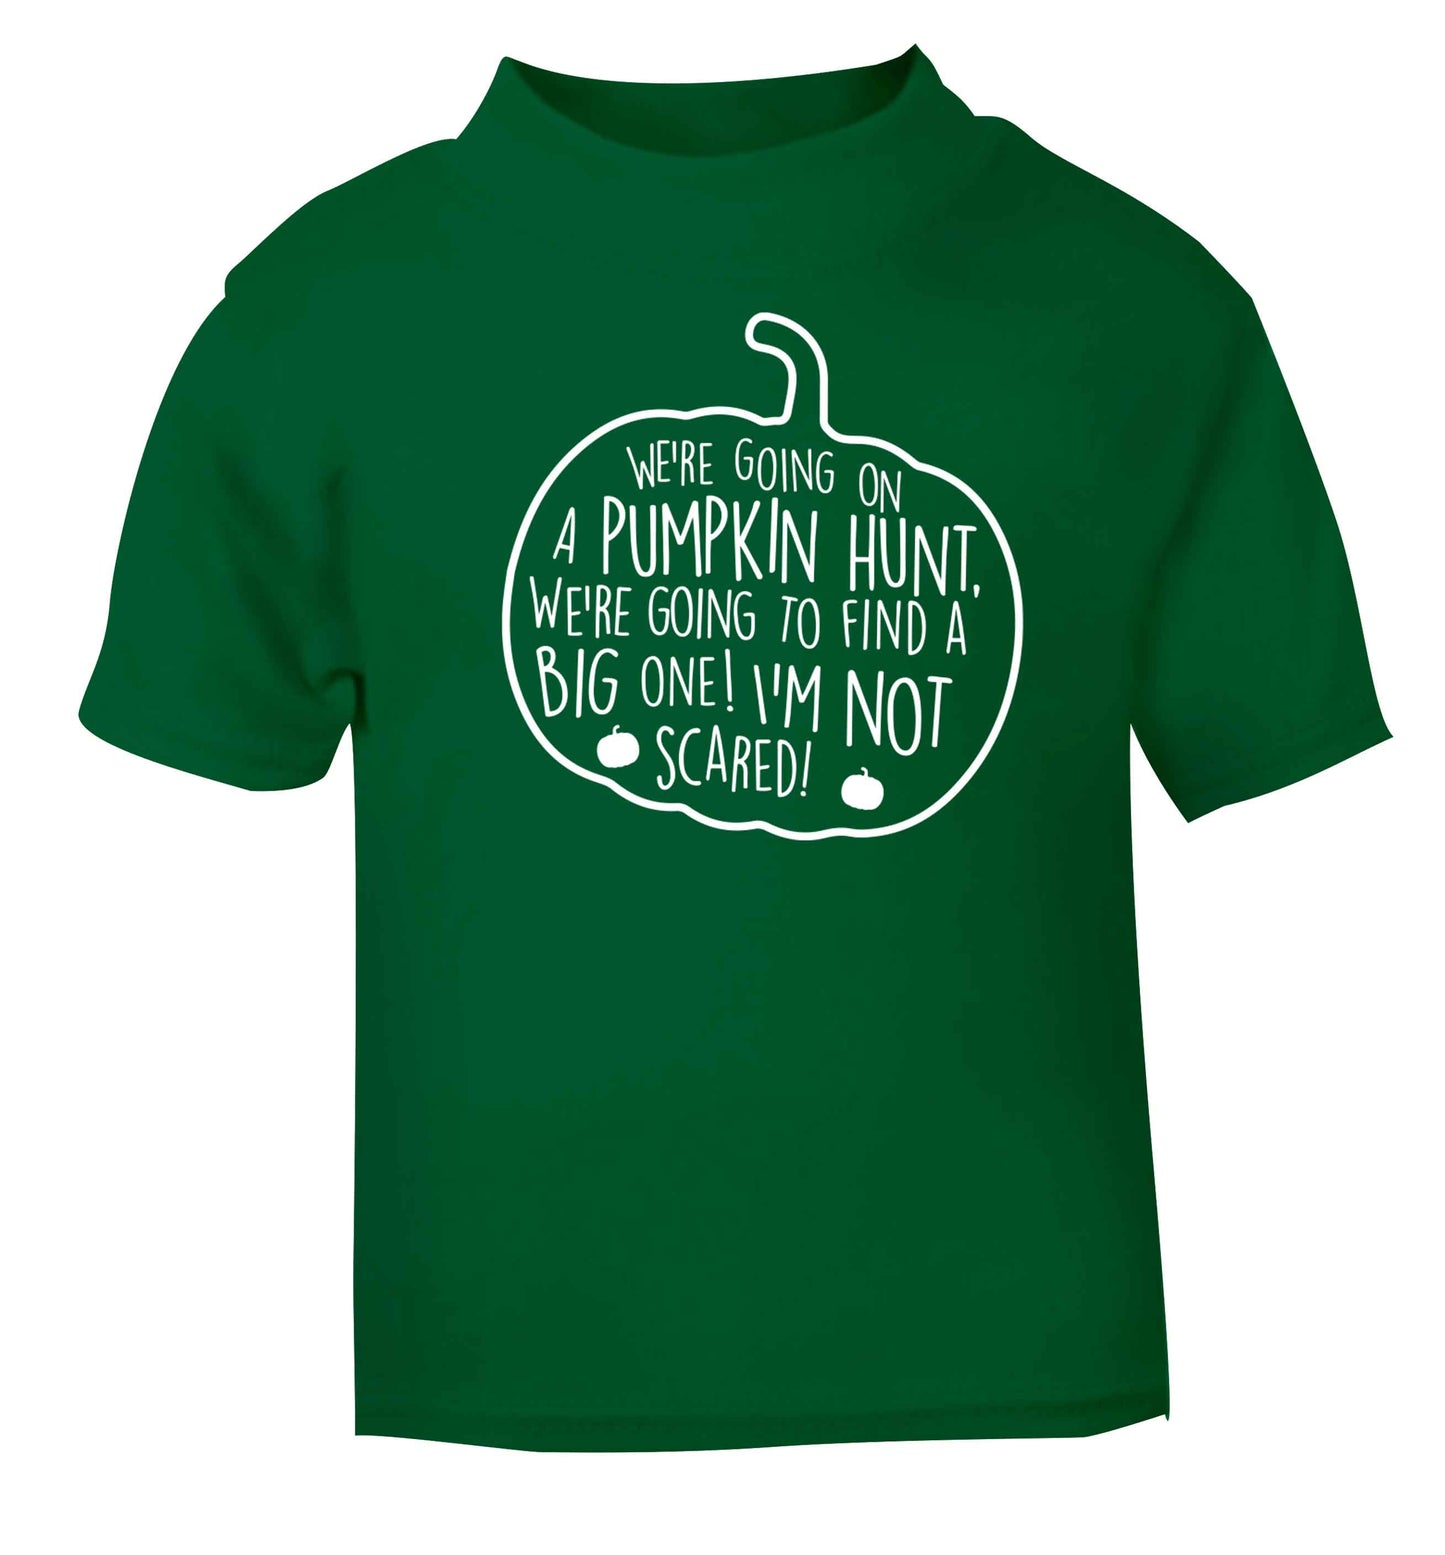 We're going on a pumpkin hunt green baby toddler Tshirt 2 Years